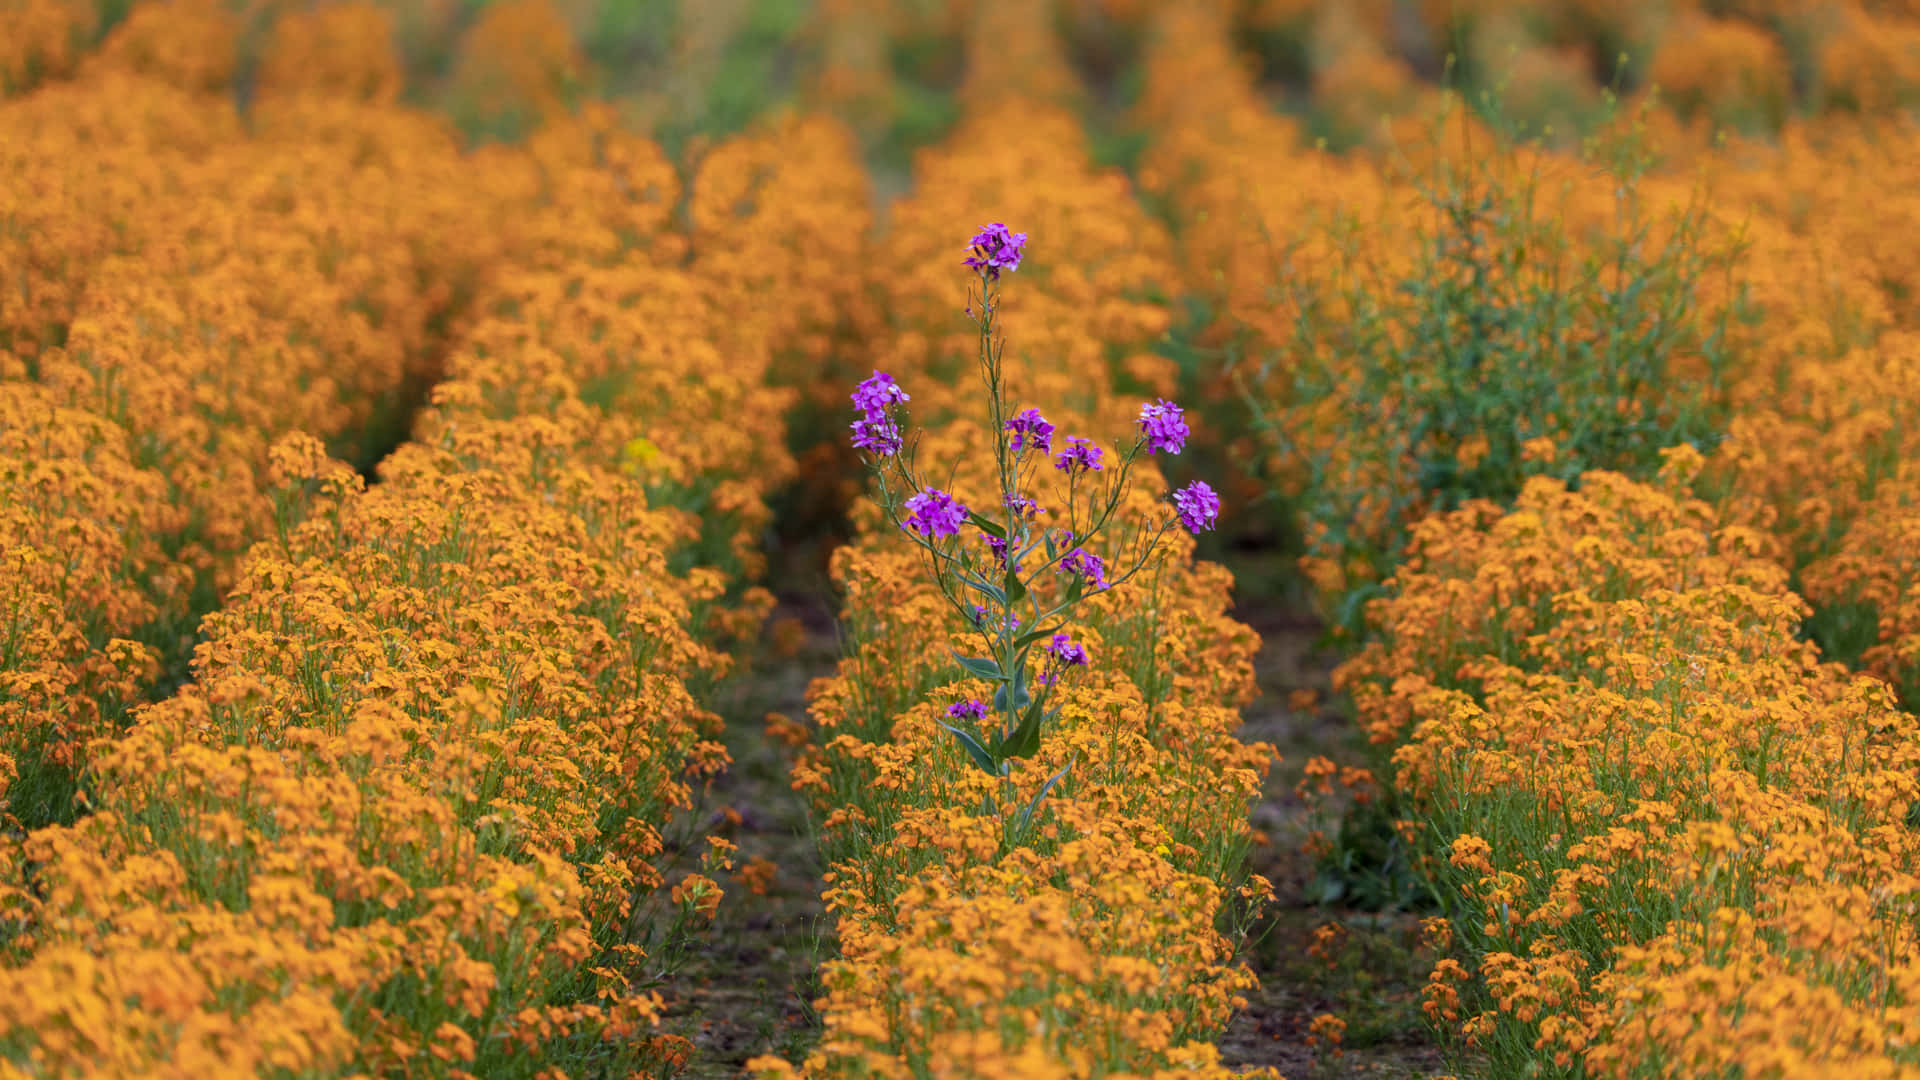 Conspicuous Violet Flower Plant On A Yellow Wildflower Field Wallpaper